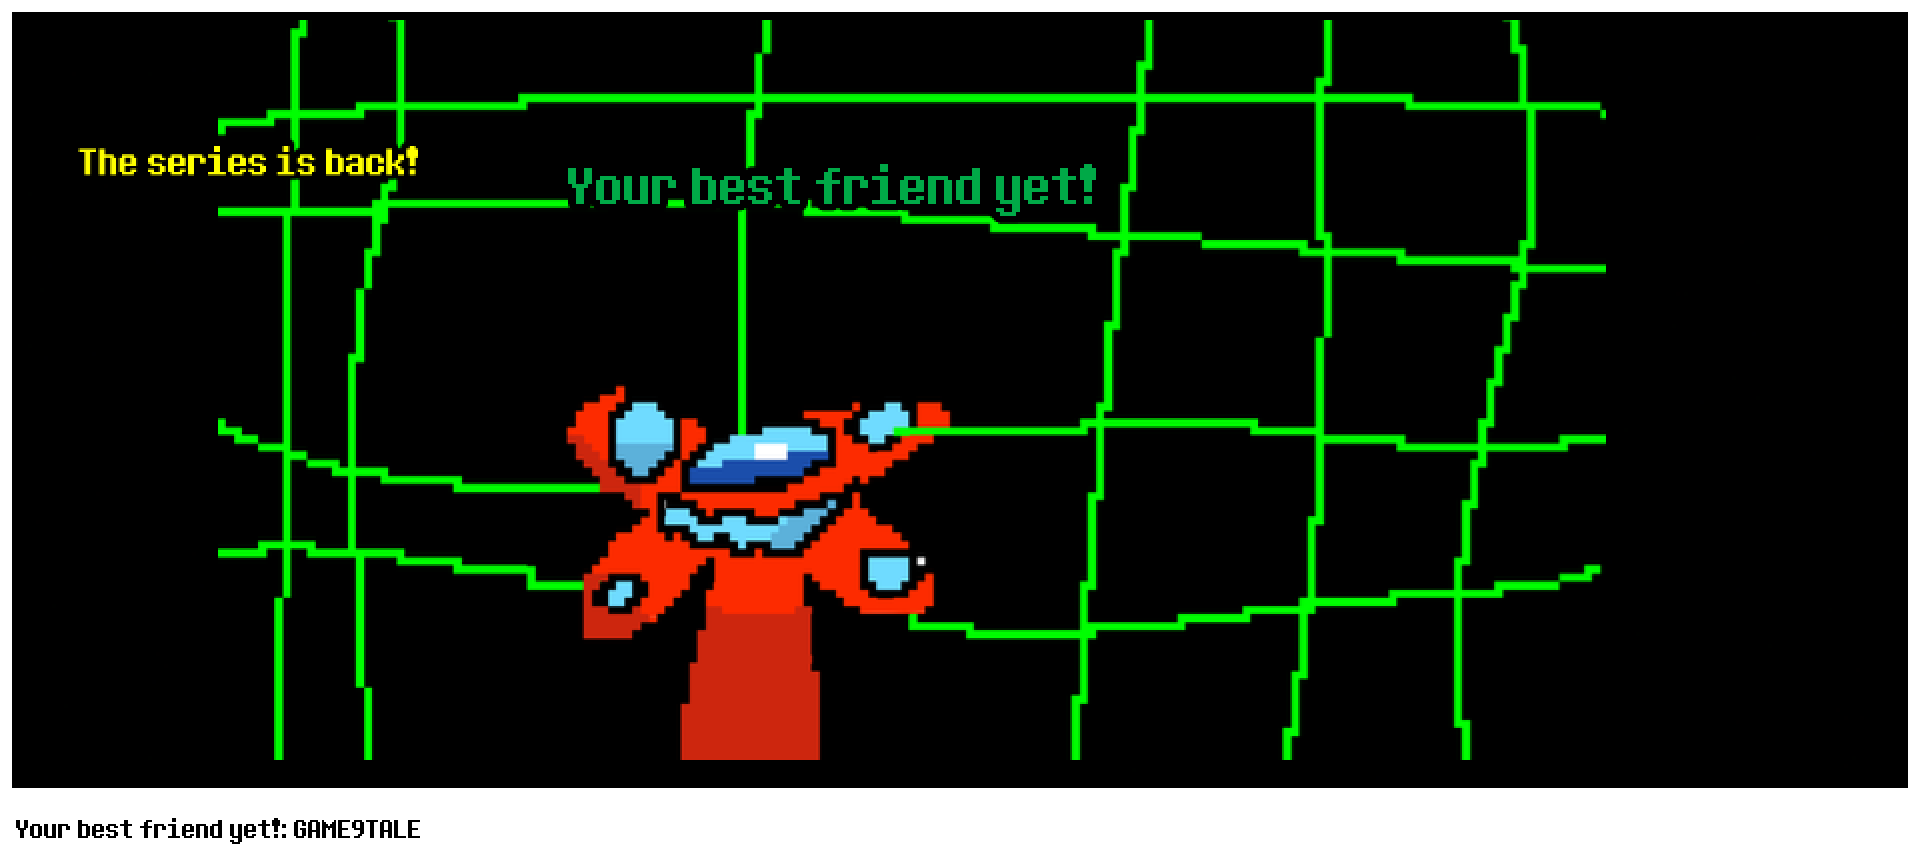 Your best friend yet!: GAME9TALE